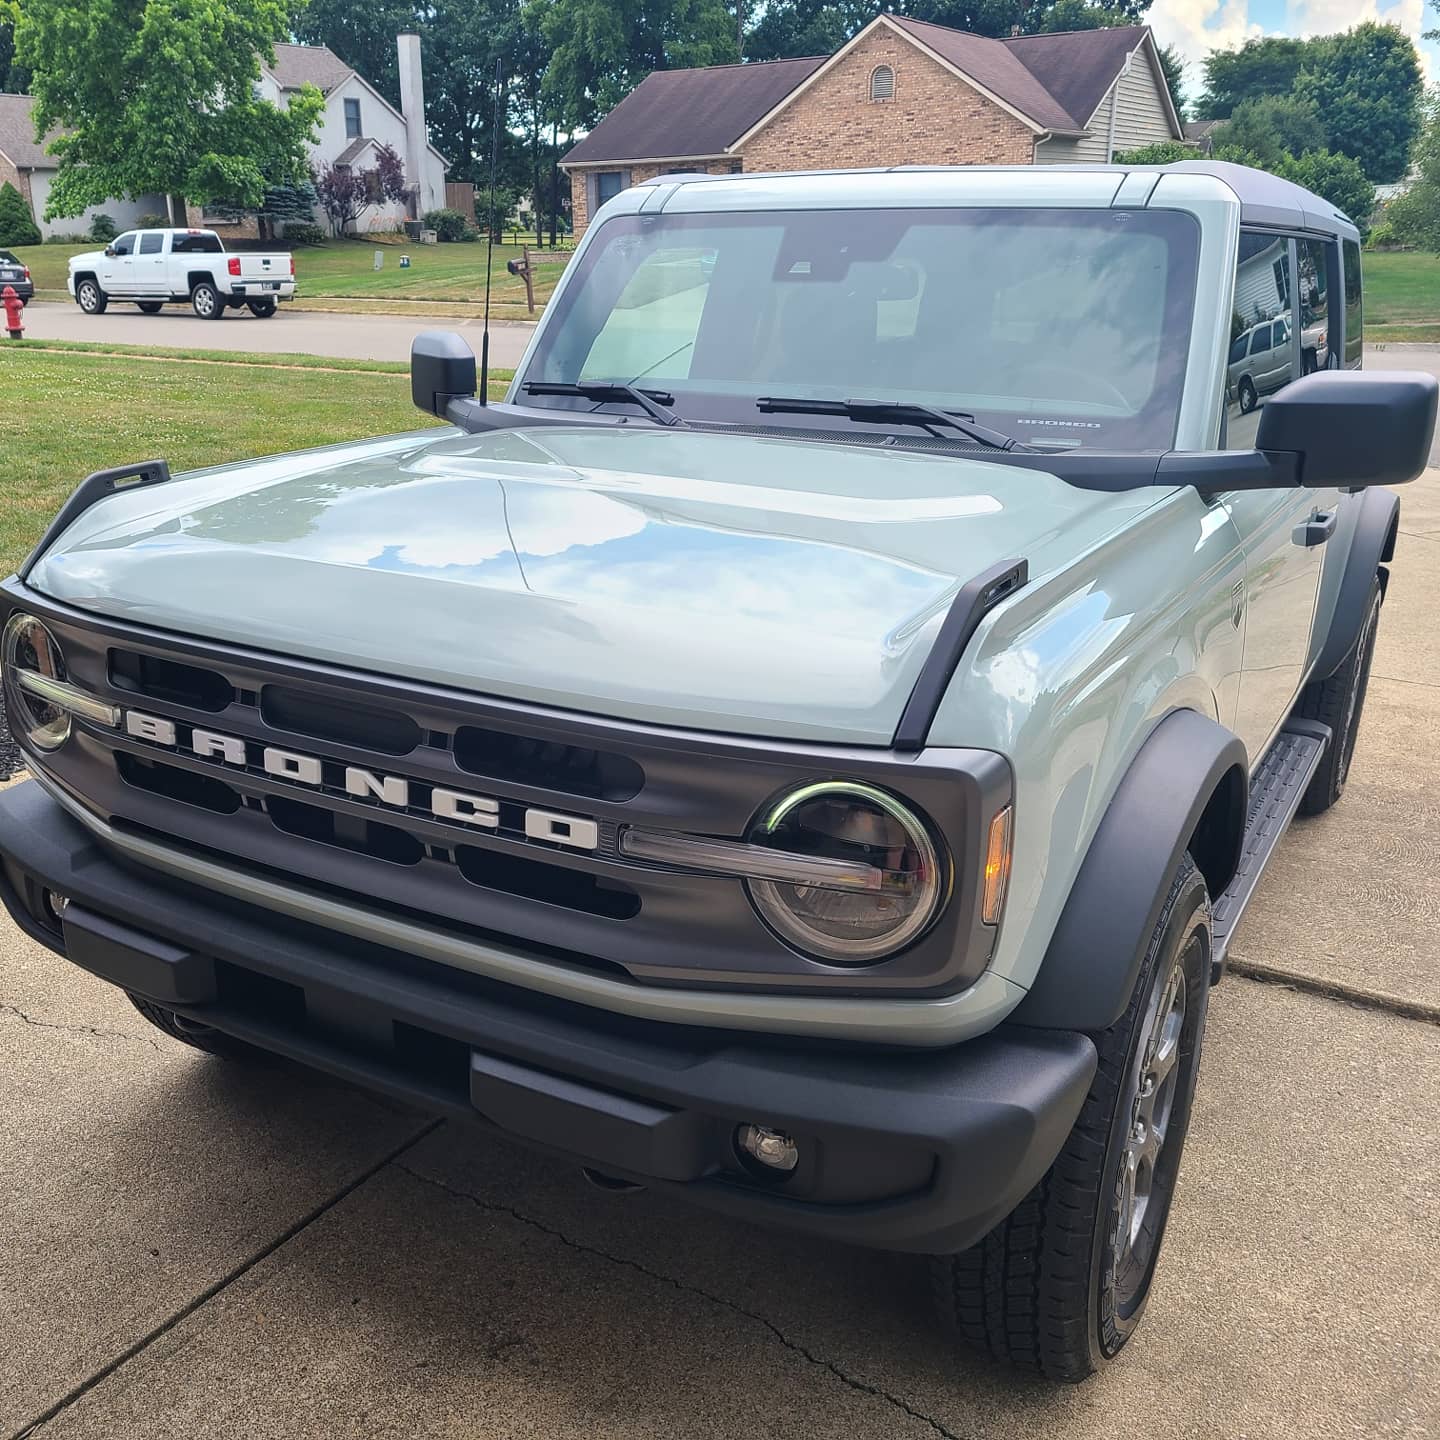 Ford Bronco My Cactus Gray Big Bend just delivered. First pics & early impressions ludwig1080